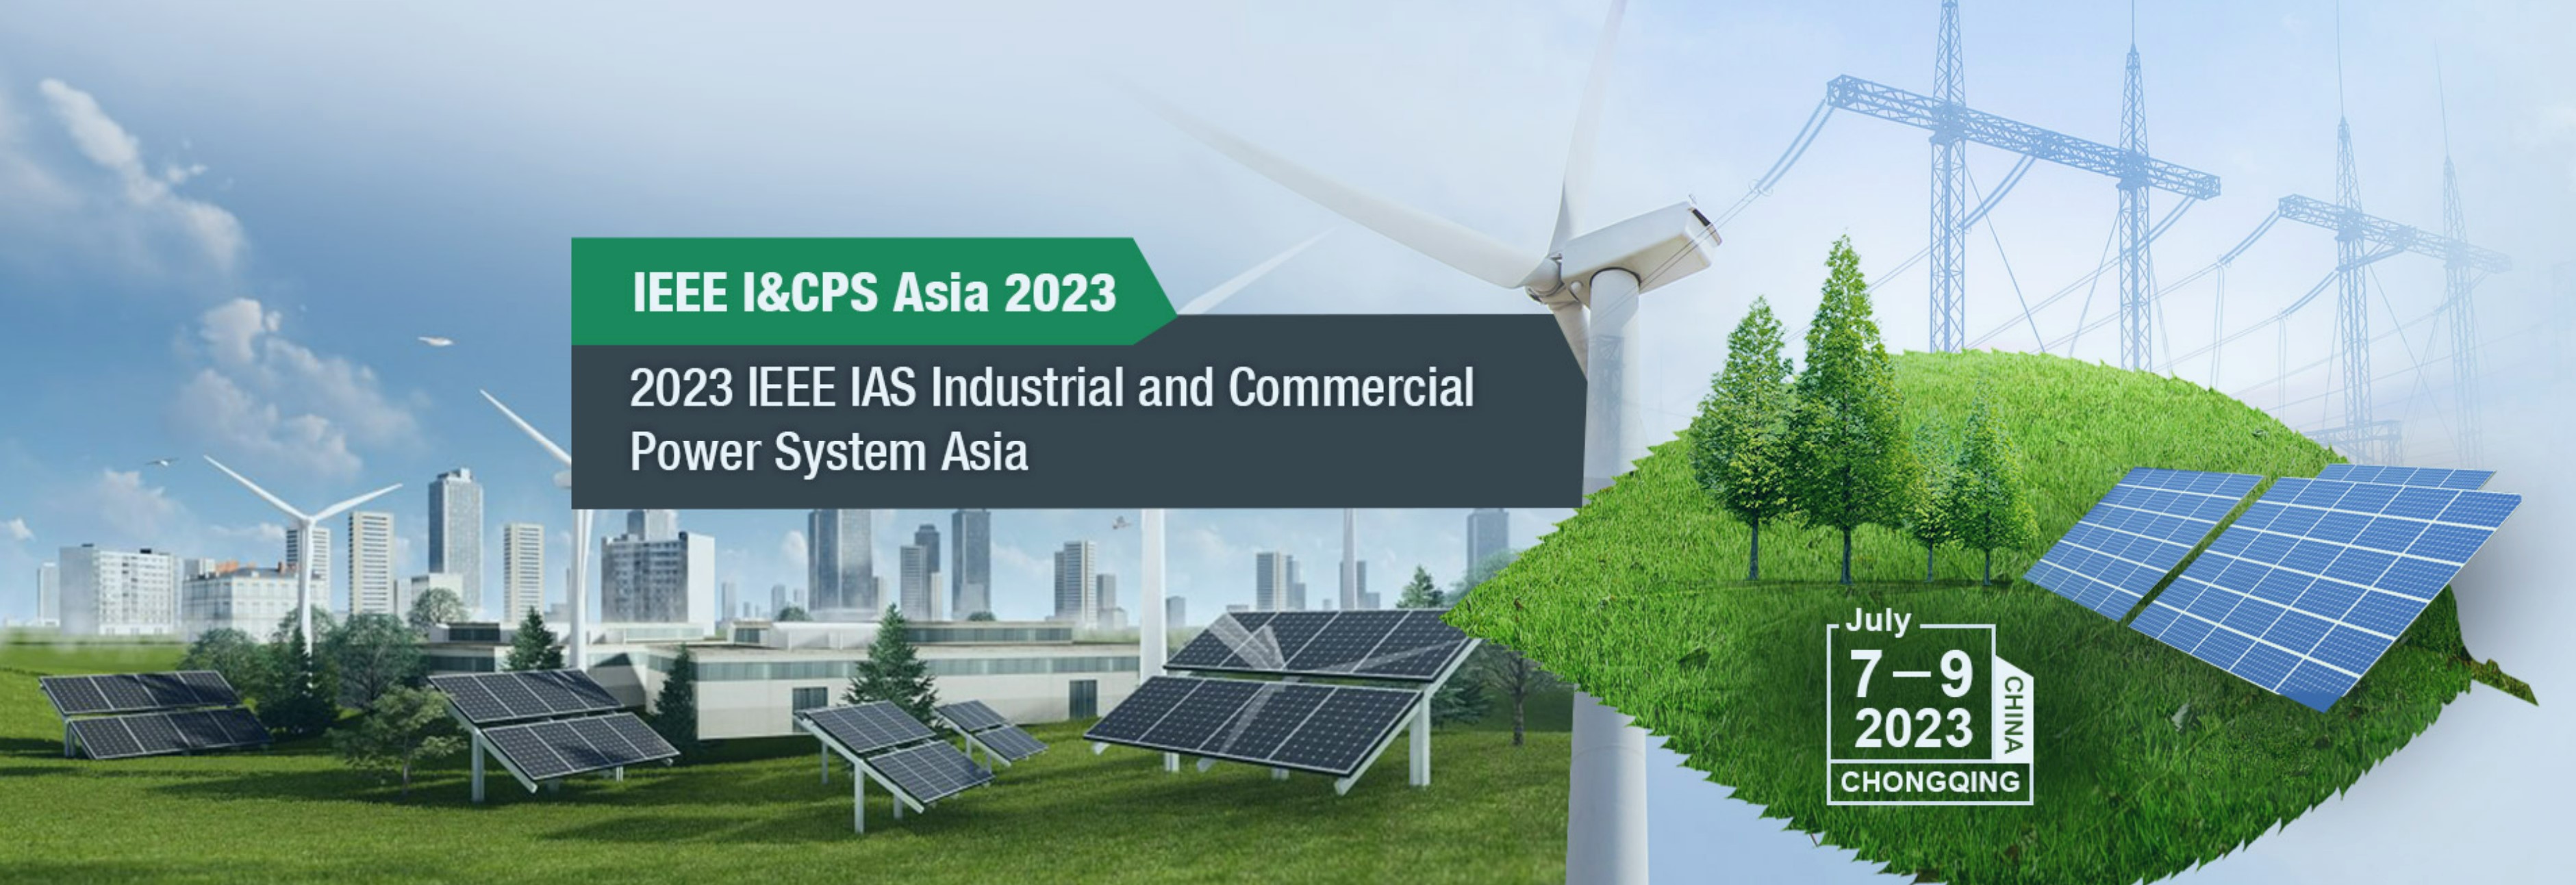 SnT Supports IEEE I&CPS Asia 2023